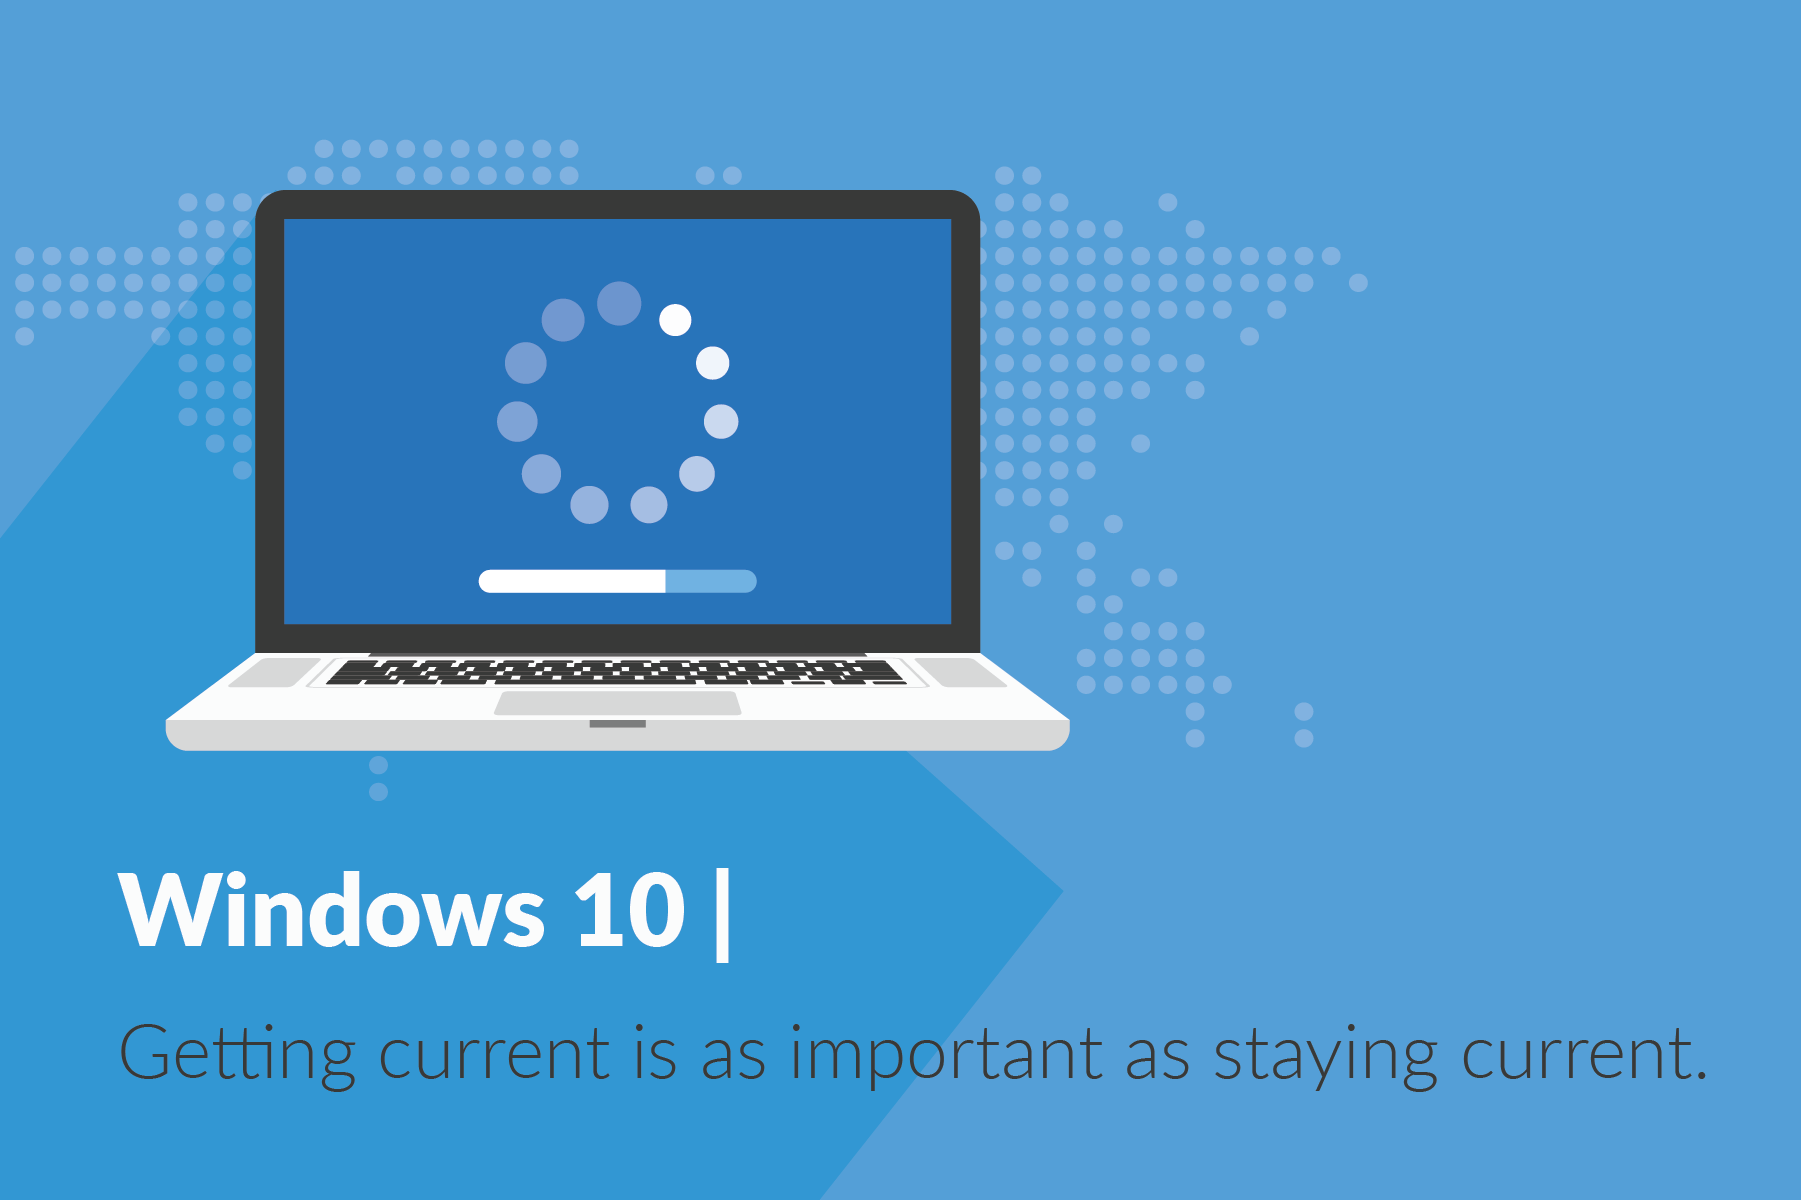 Windows 10 | Getting Current is as Important as Staying Current